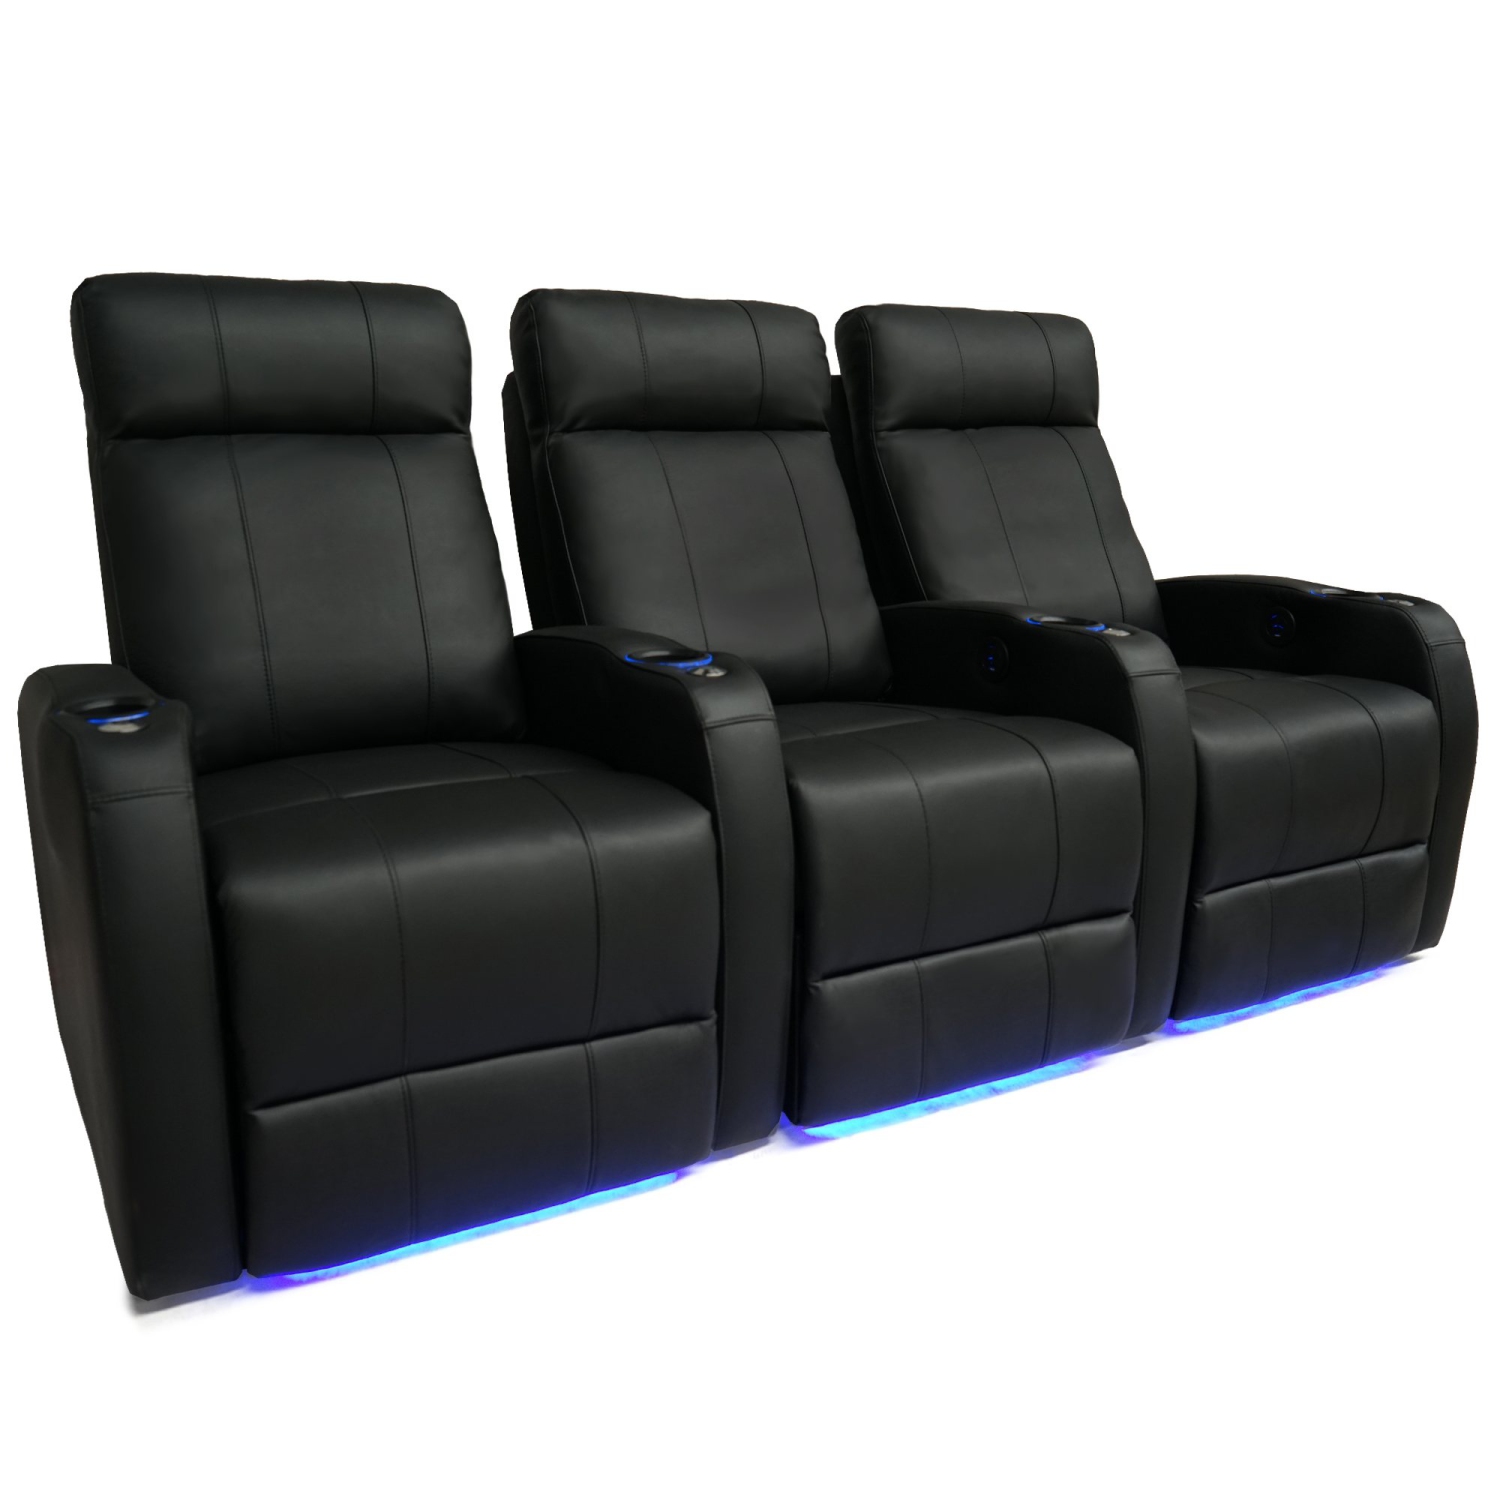 Valencia Syracuse Motorized Home Theater Seating - Top Grain Leather